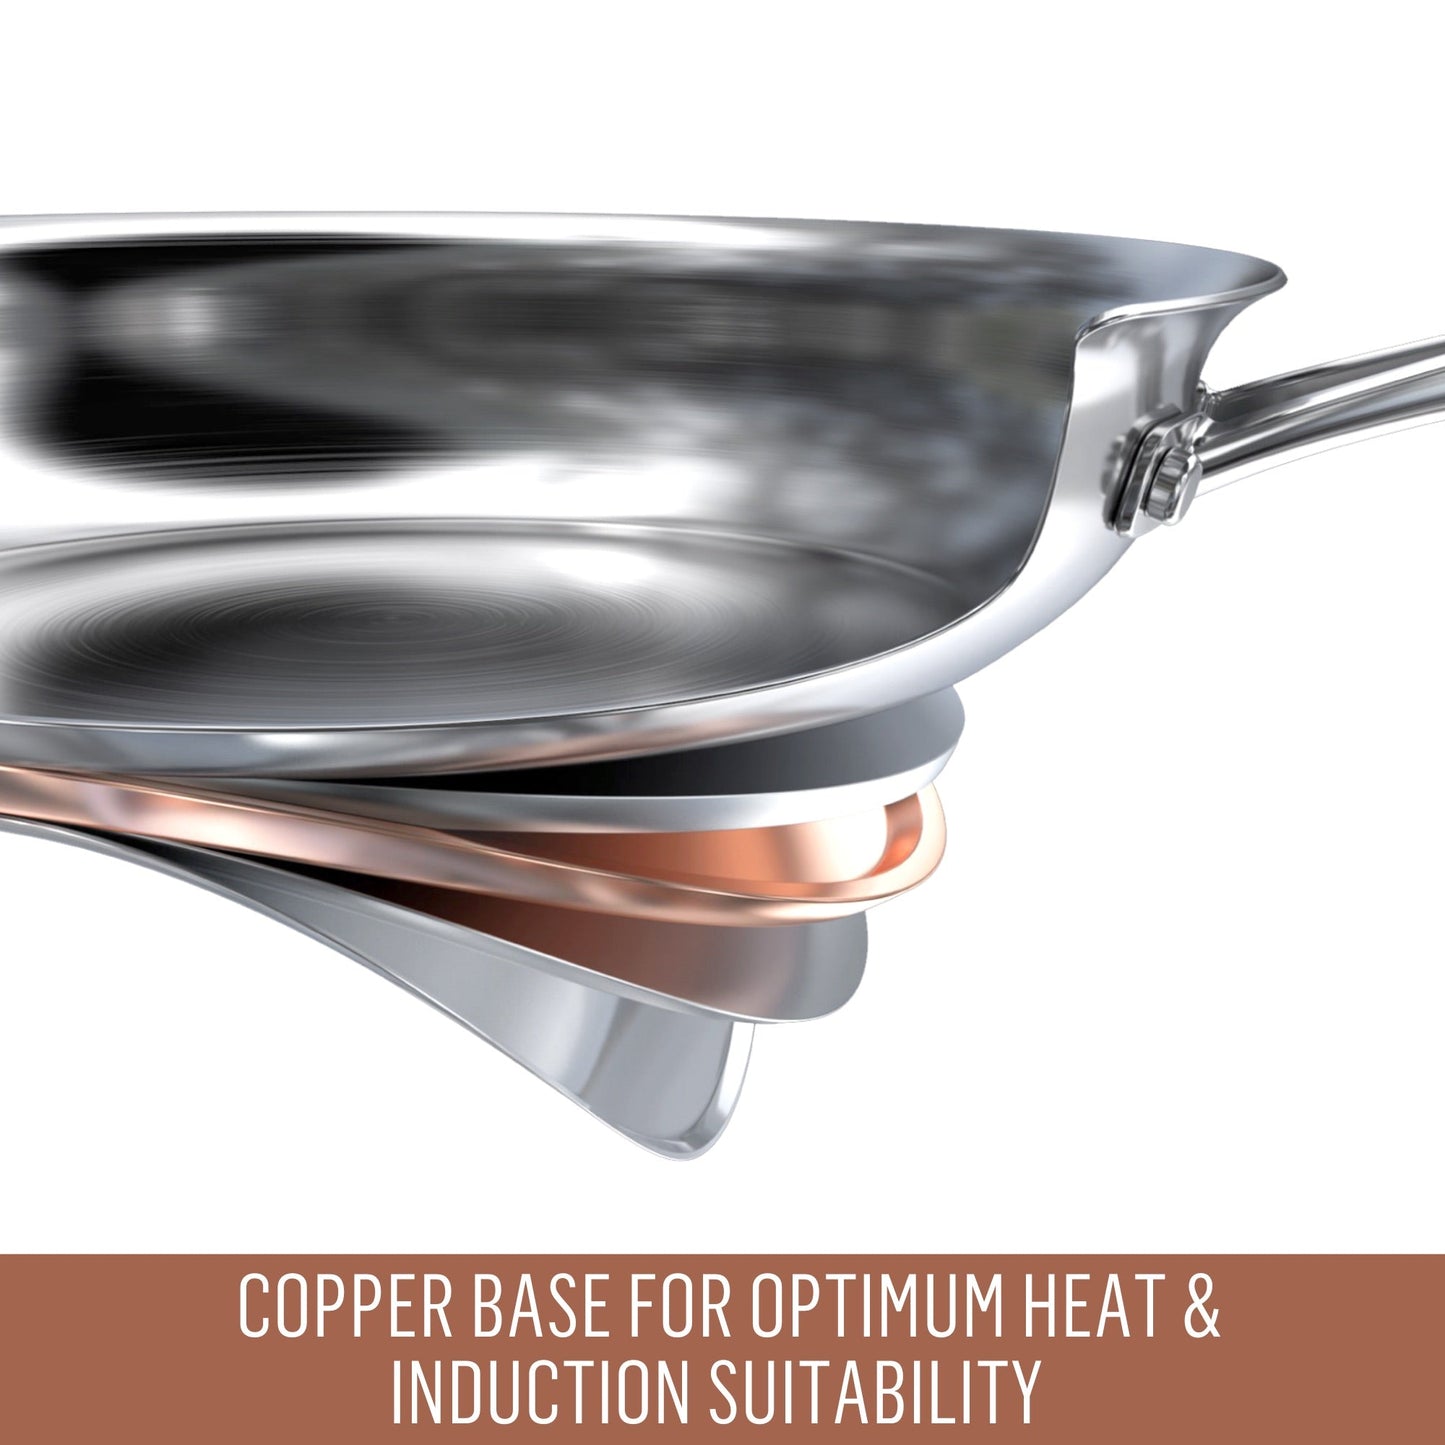 Essteele Per Vita Copper Base Stainless Steel Induction Covered Sautéuse 28cm/5.2L